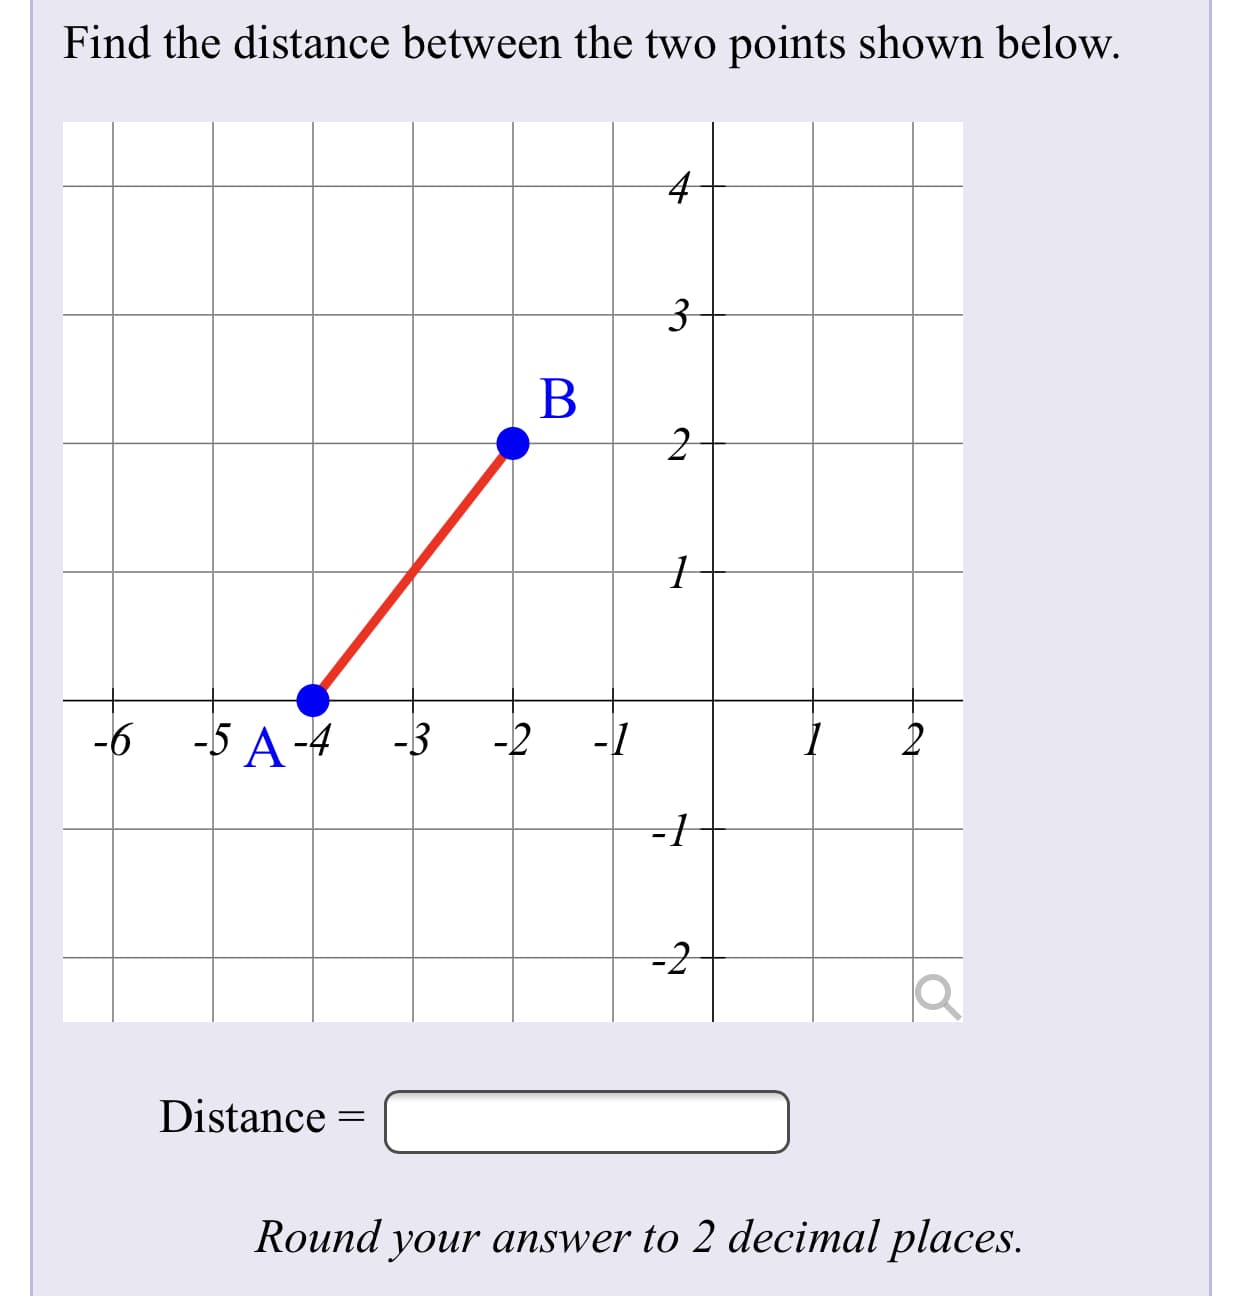 Find the distance between the two points shown below.
-6 -5 A-4 -3
-2
-1
-1
-2
Distance =
Round your answer to 2 decimal places.
